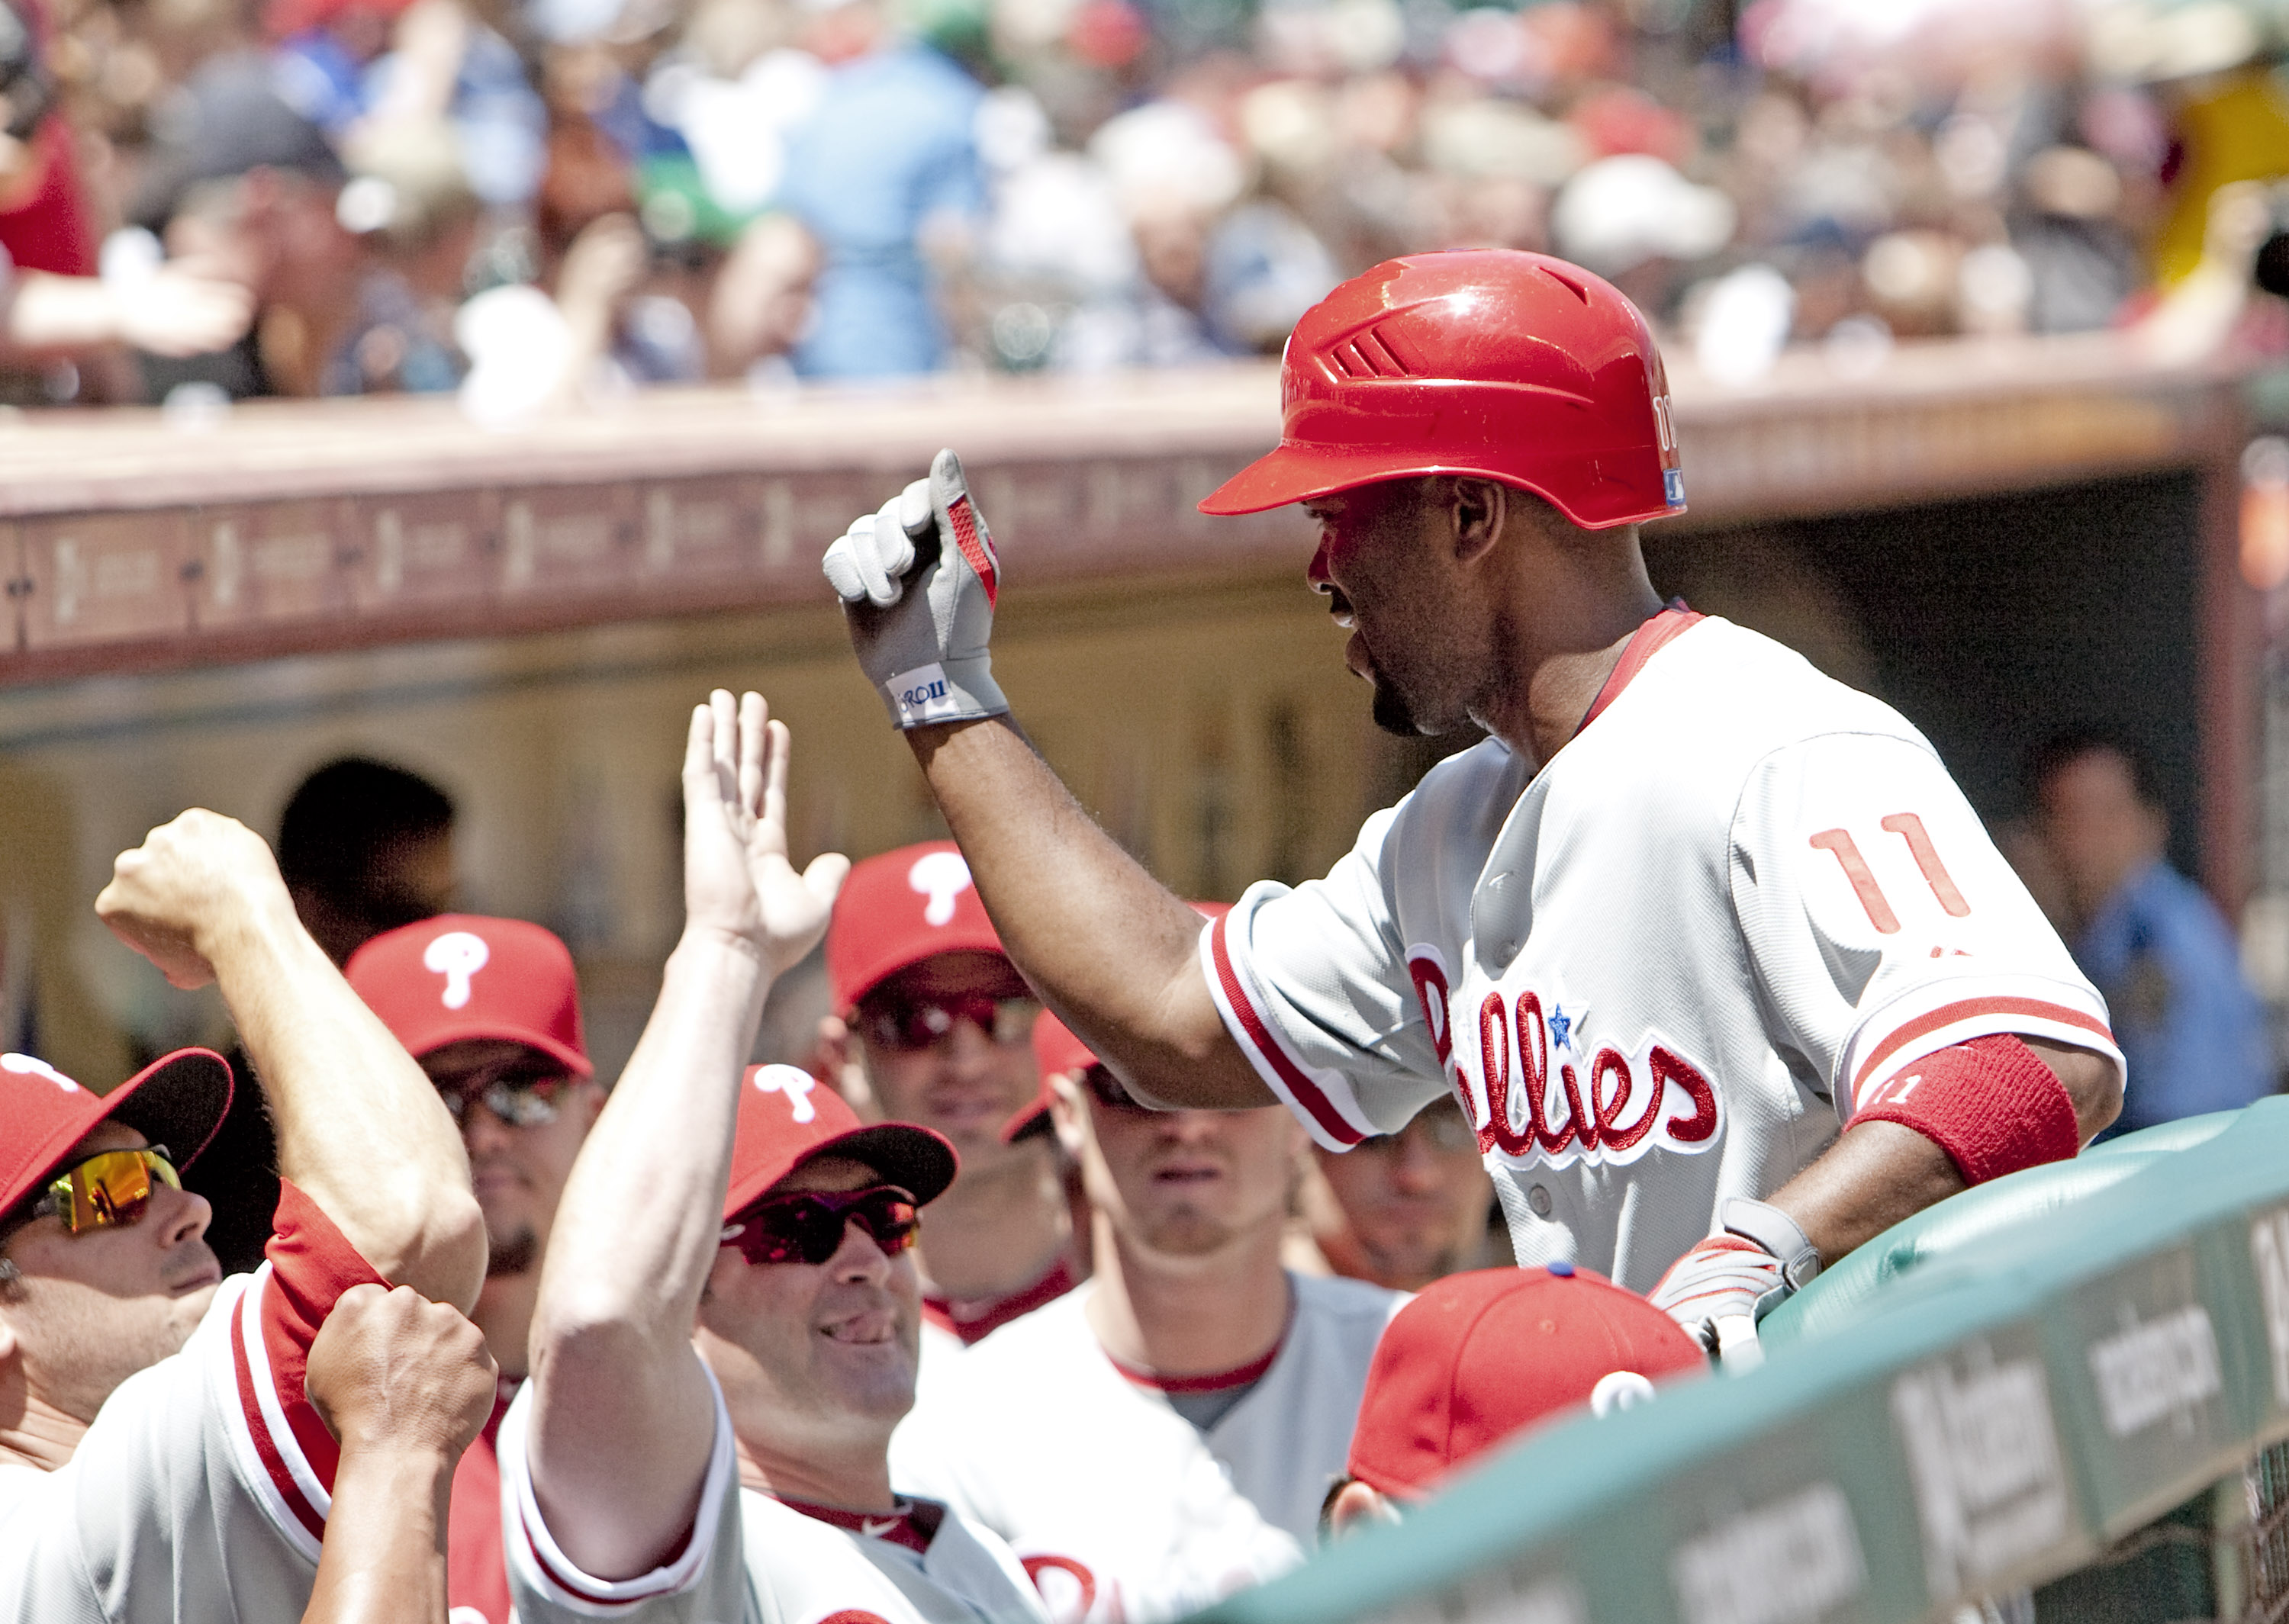 Phillies Re-Sign Jimmy Rollins - MLB Trade Rumors